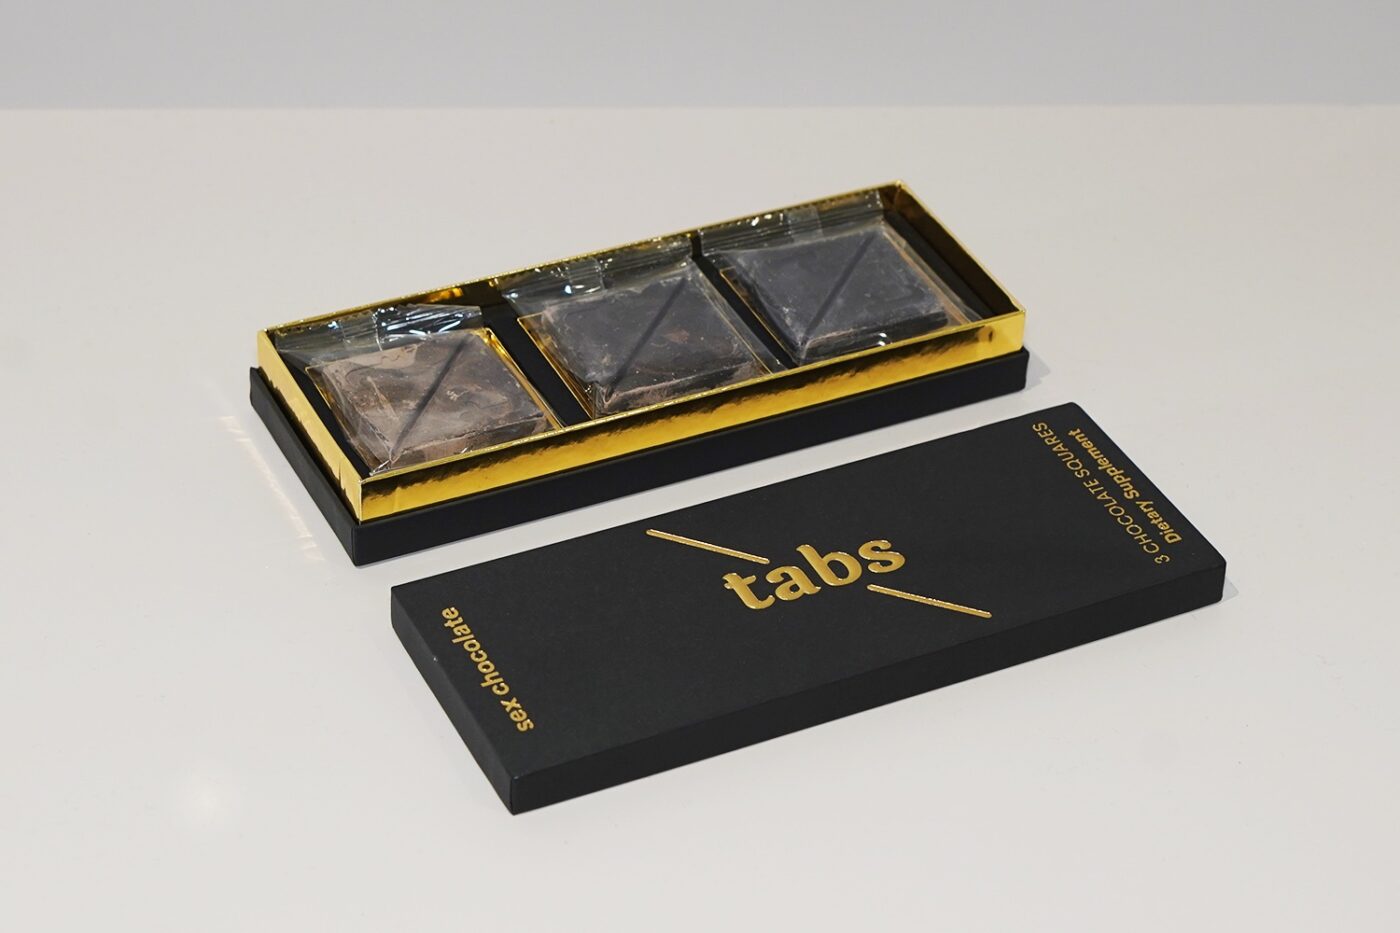 Tabs Chocolate Review - In-Depth Review of Tabs Chocolate